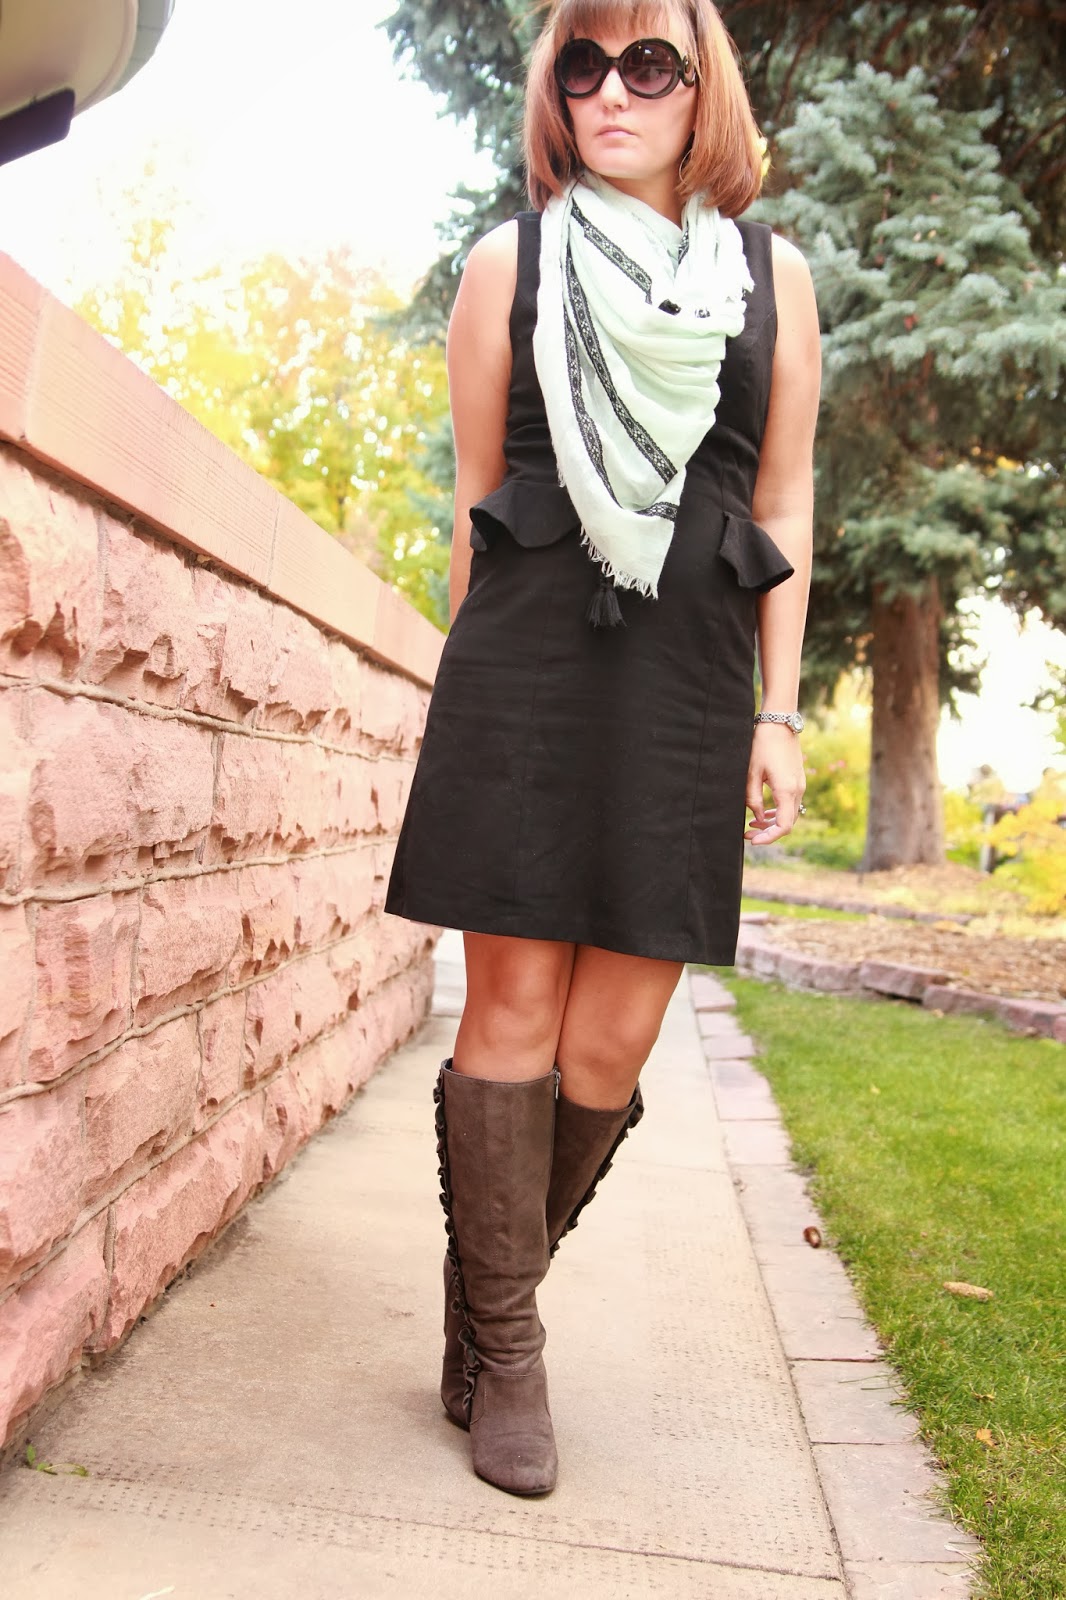 FranniePantz: Mission #21, Day 2--LBD, Scarf and Boots